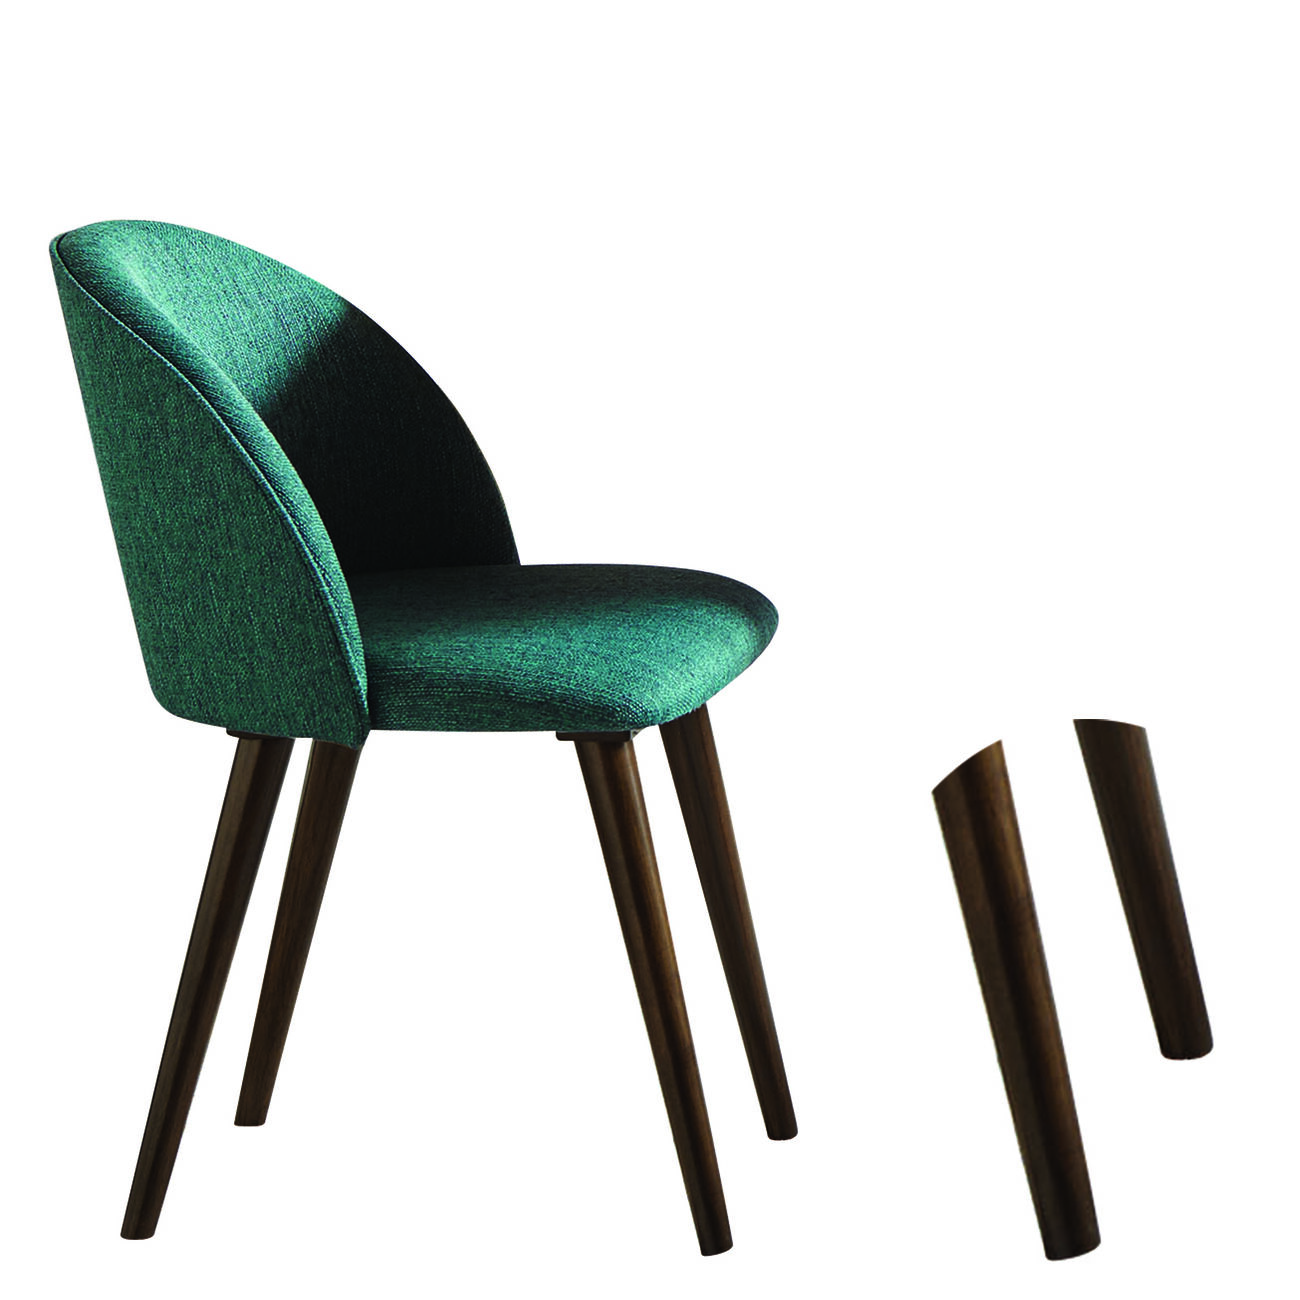 Wooden Dining Chairs with Fabric Upholstered Seat and Back, Aqua Green and Brown, Set of Two